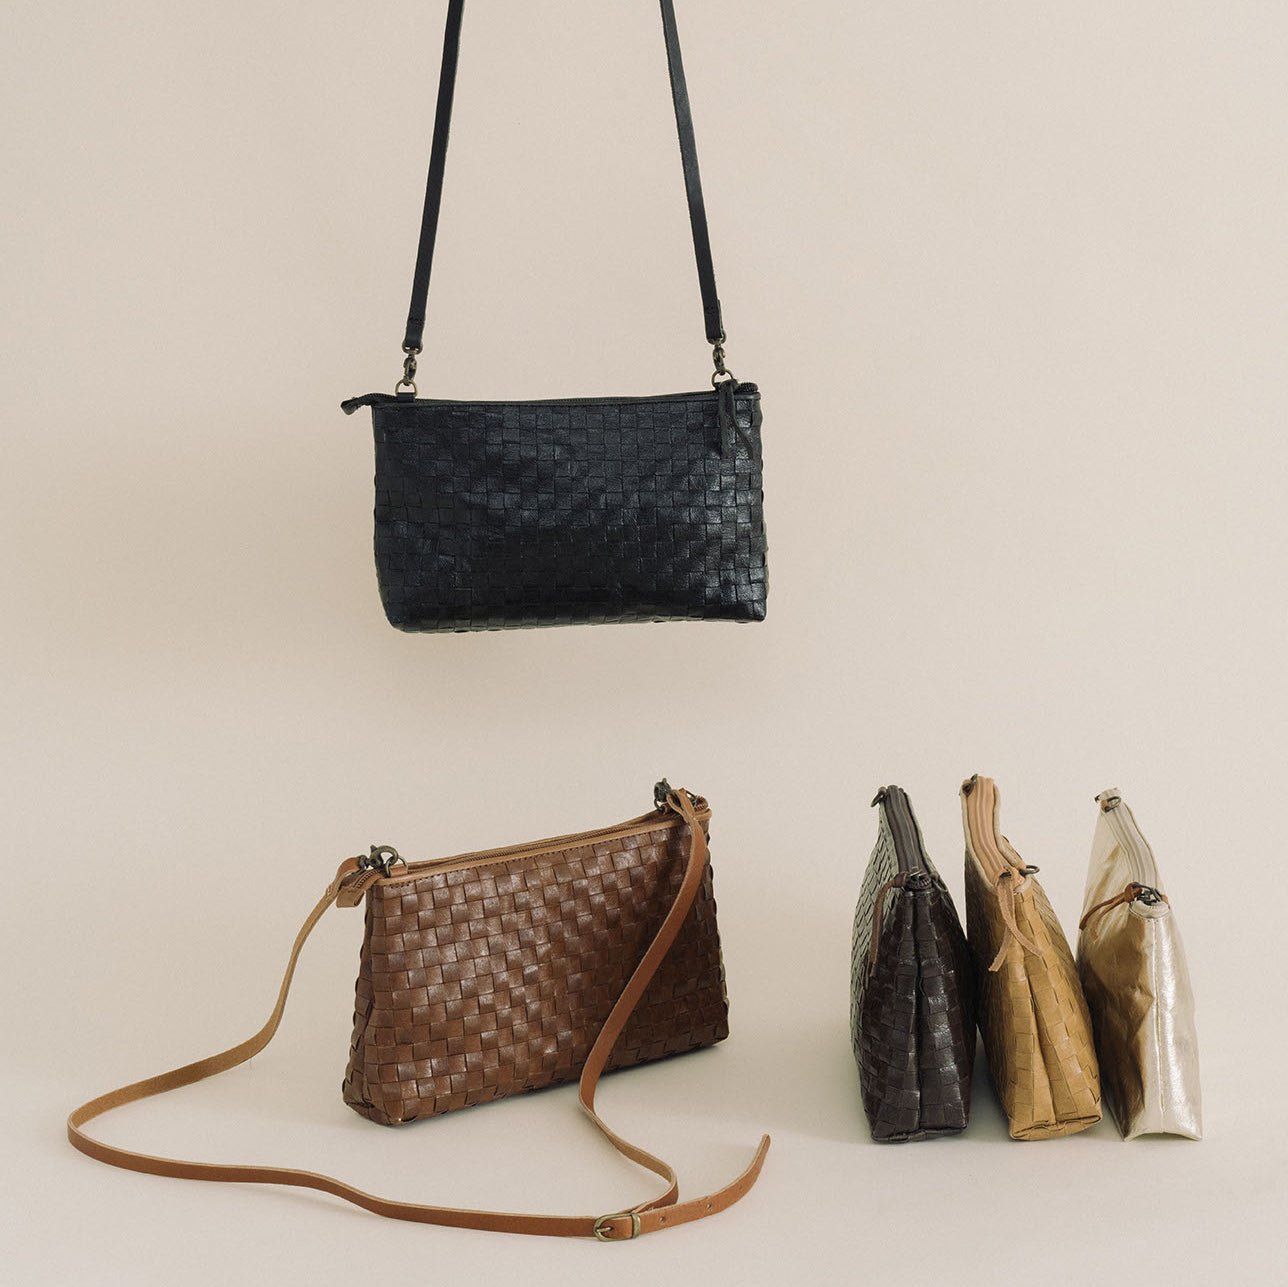 Five woven washable paper handbags are shown, one hanging, four on a surface. They are black, brown, chocolate brown, tan and metallic.